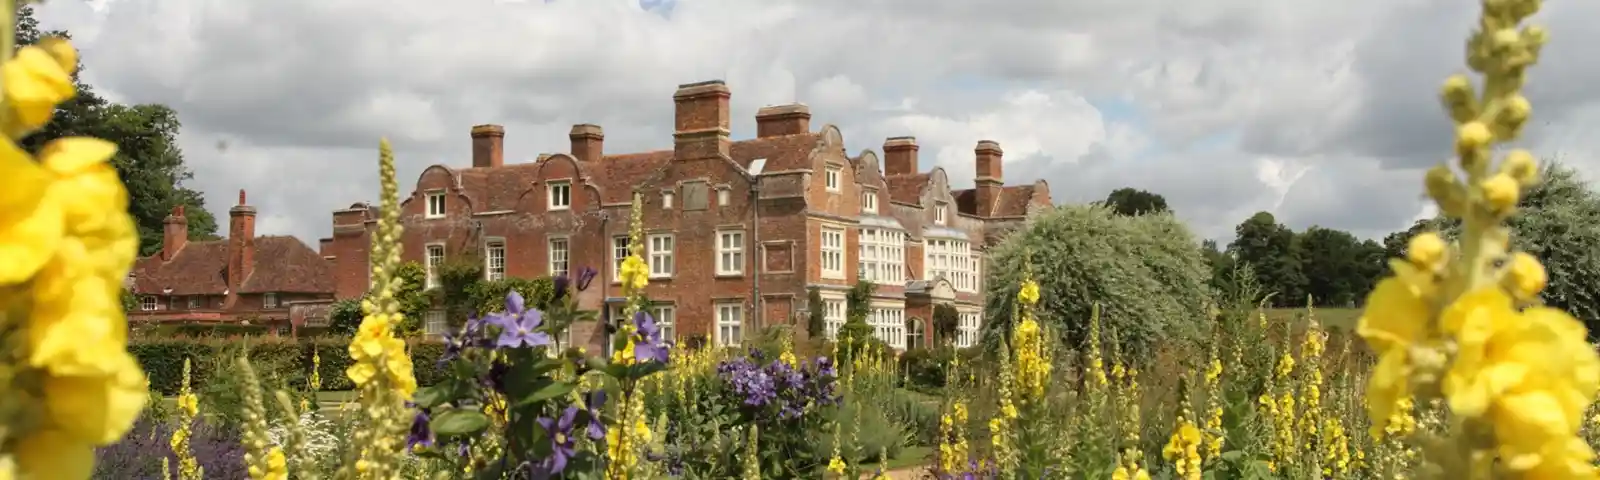 Godinton House (c) Flowers in front of house.jpg